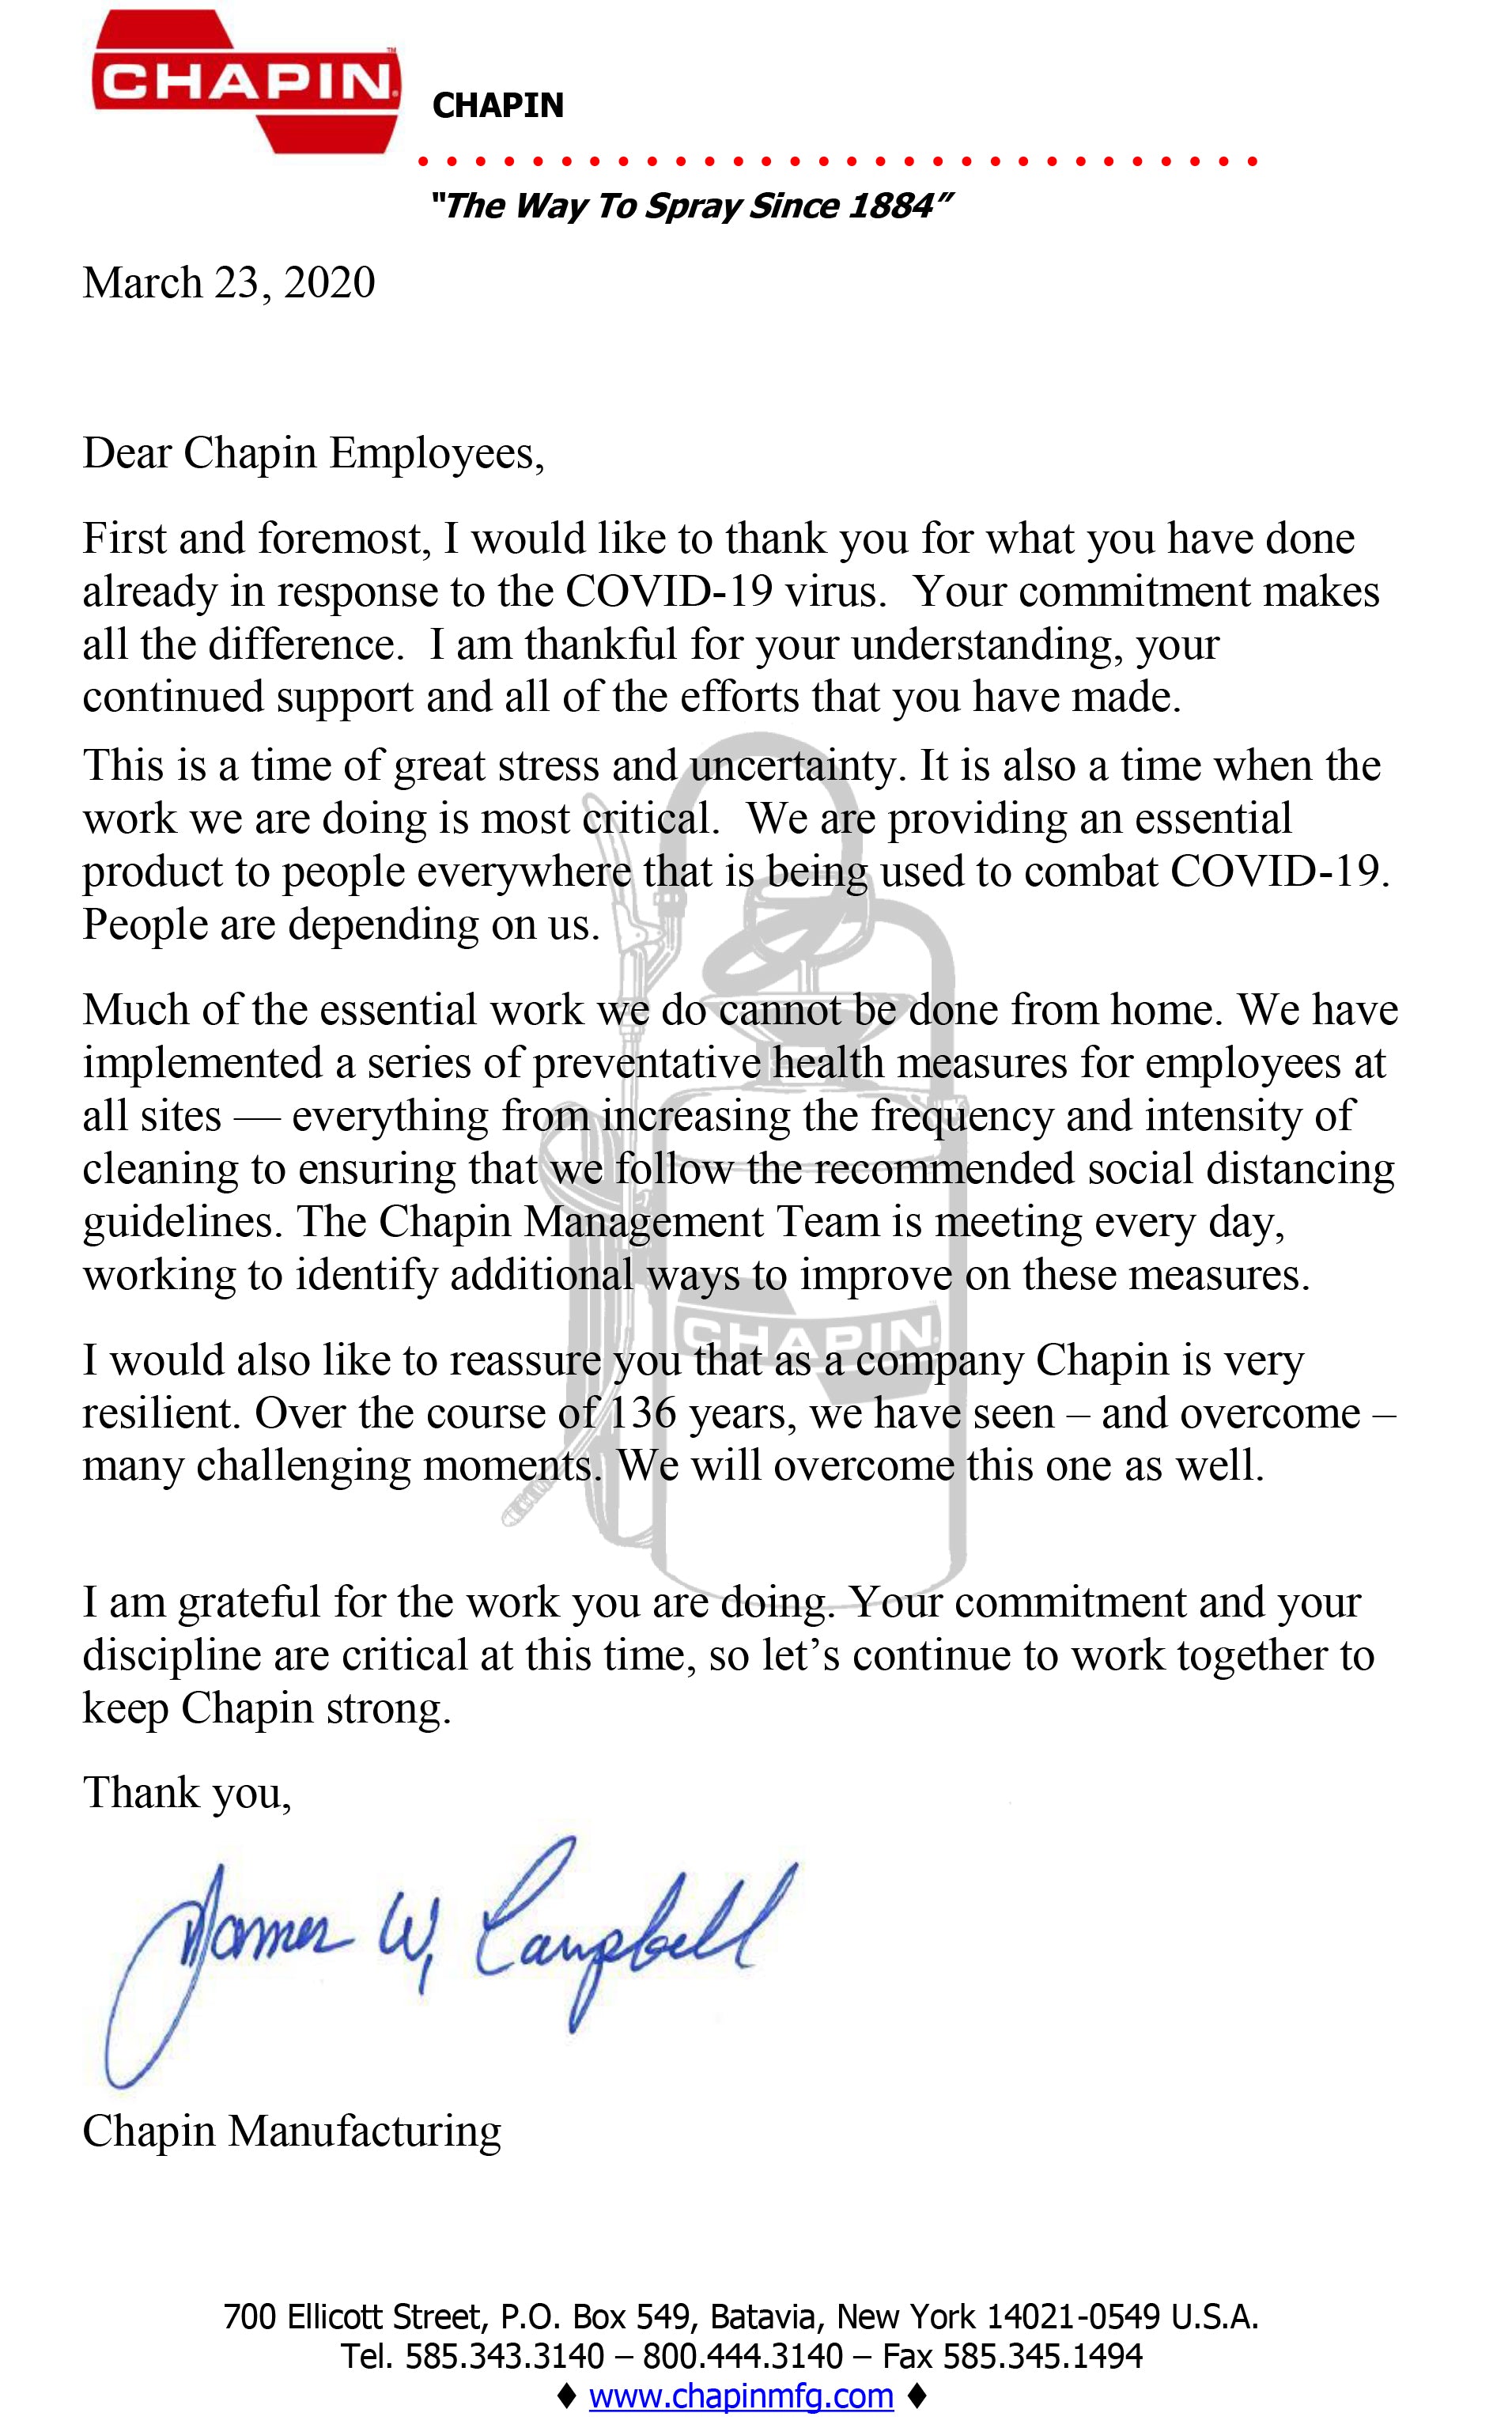 Chapin Employee Letter of Thanks